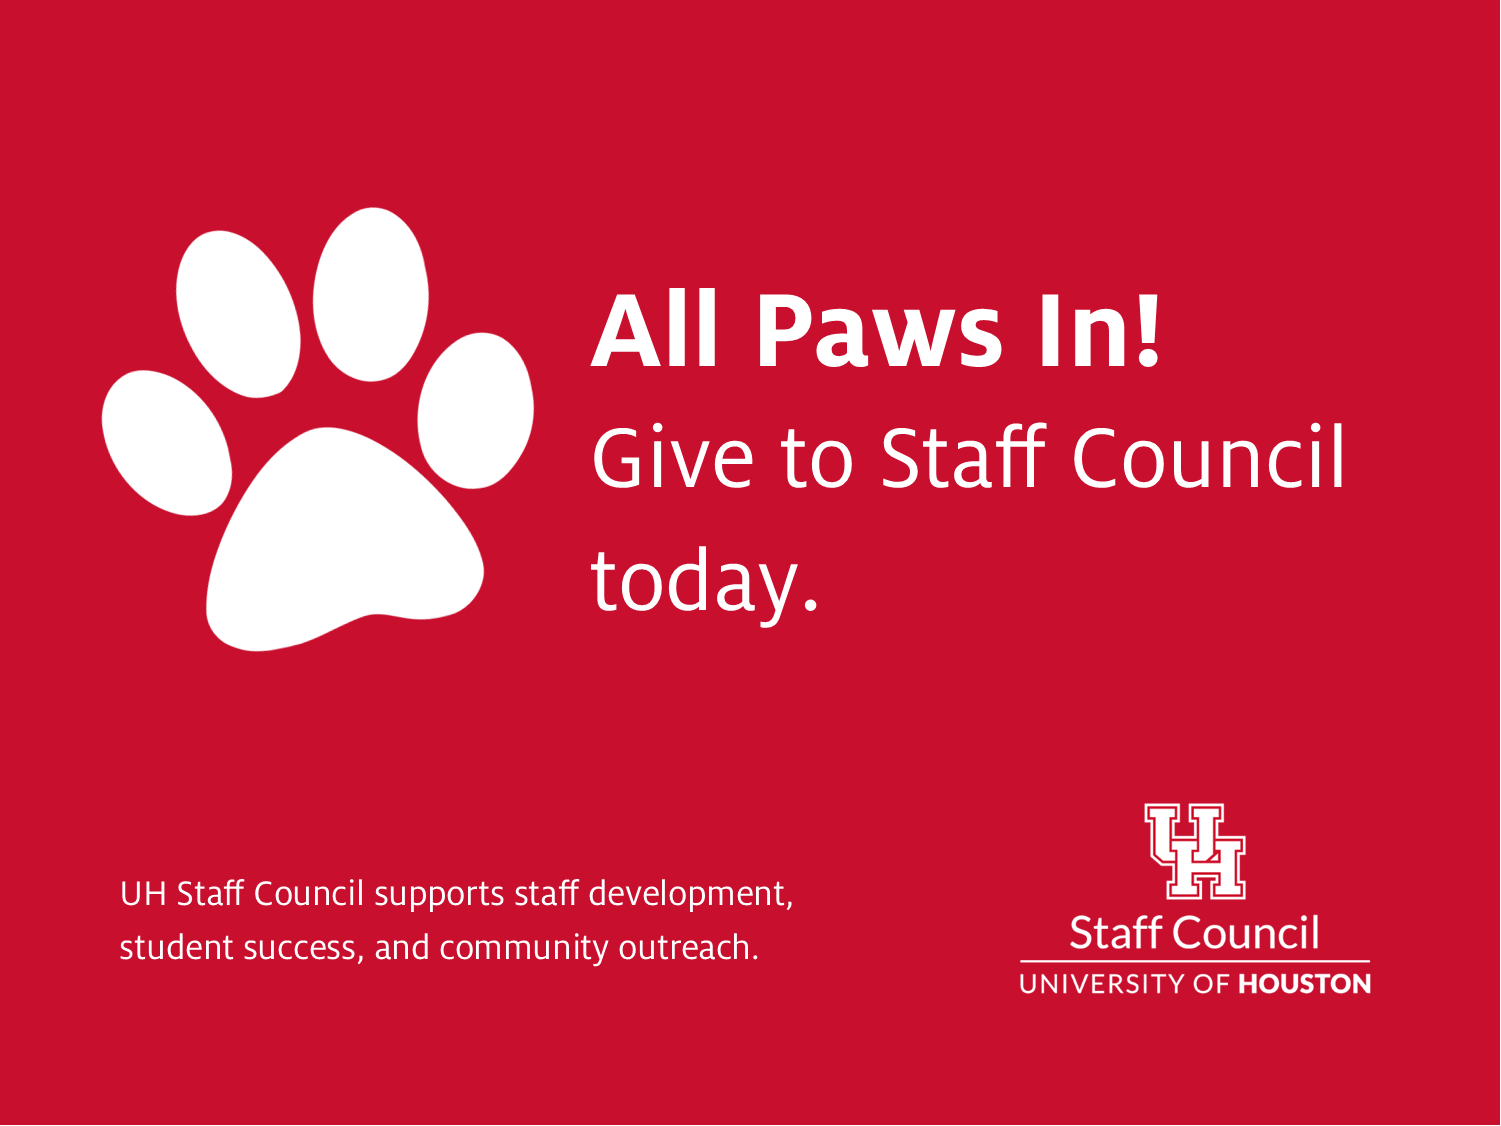 Give Today to the "All Paws In!" Campaign for Staff Council